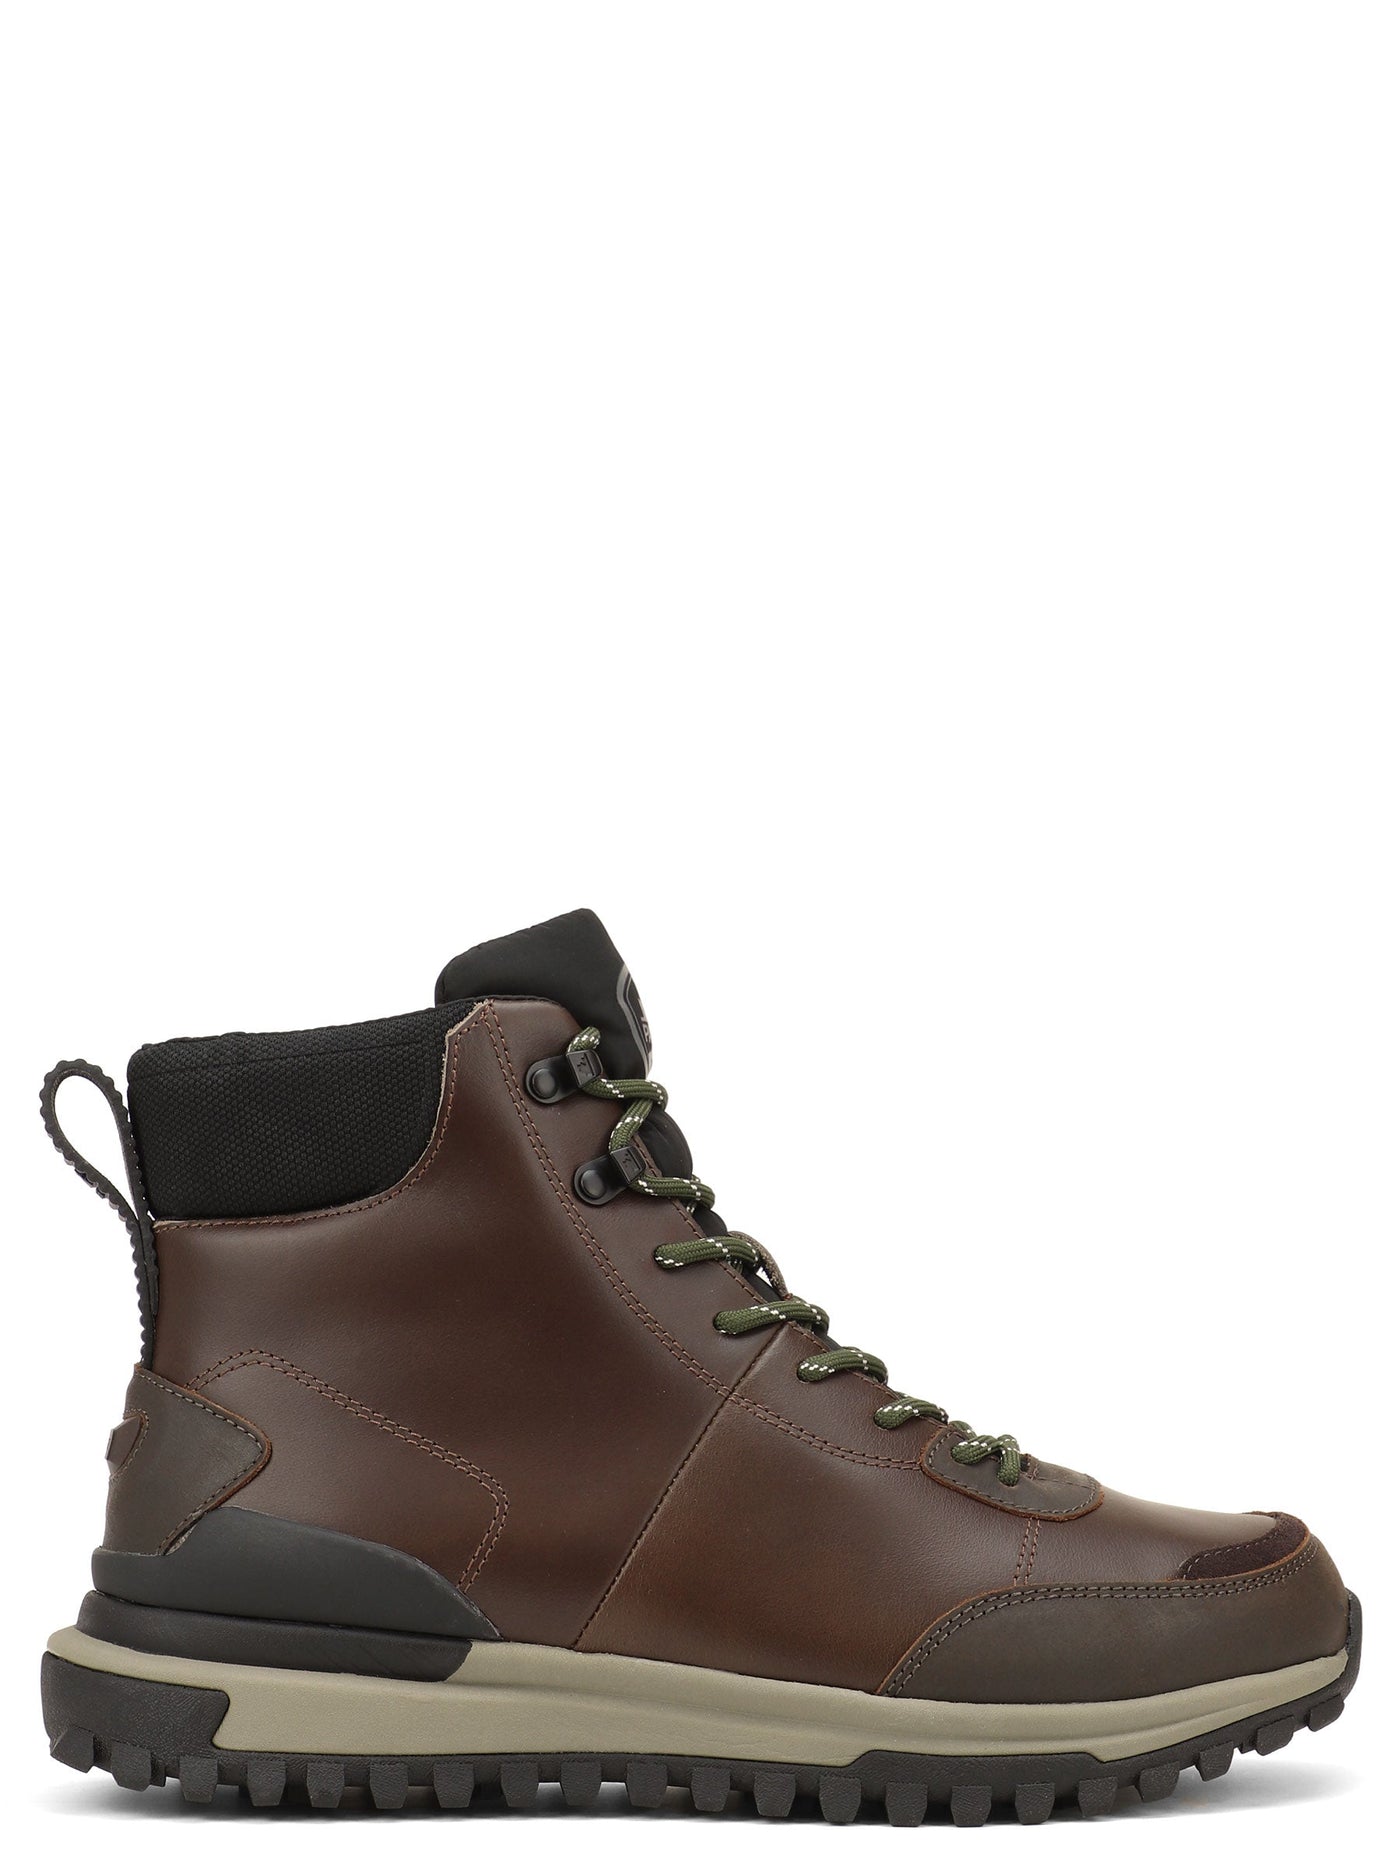 Camo Mens Bradley Sneaker Lace-up Boot | Heydude | Rack Room Shoes